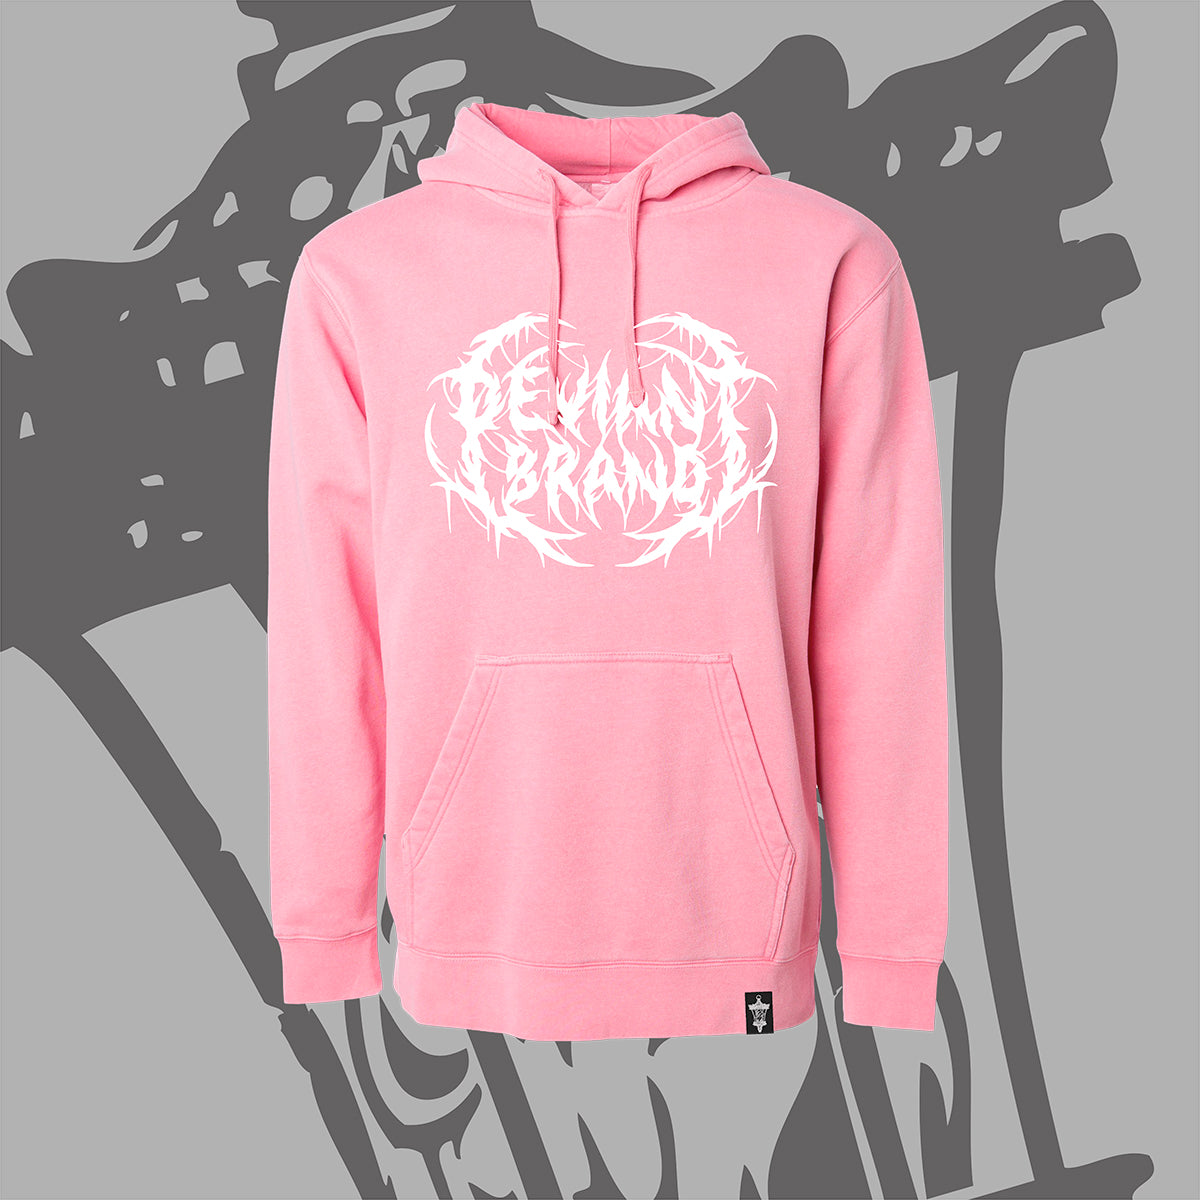 NEW** "Metal Pullover Hoodie! – Deviant Clothing